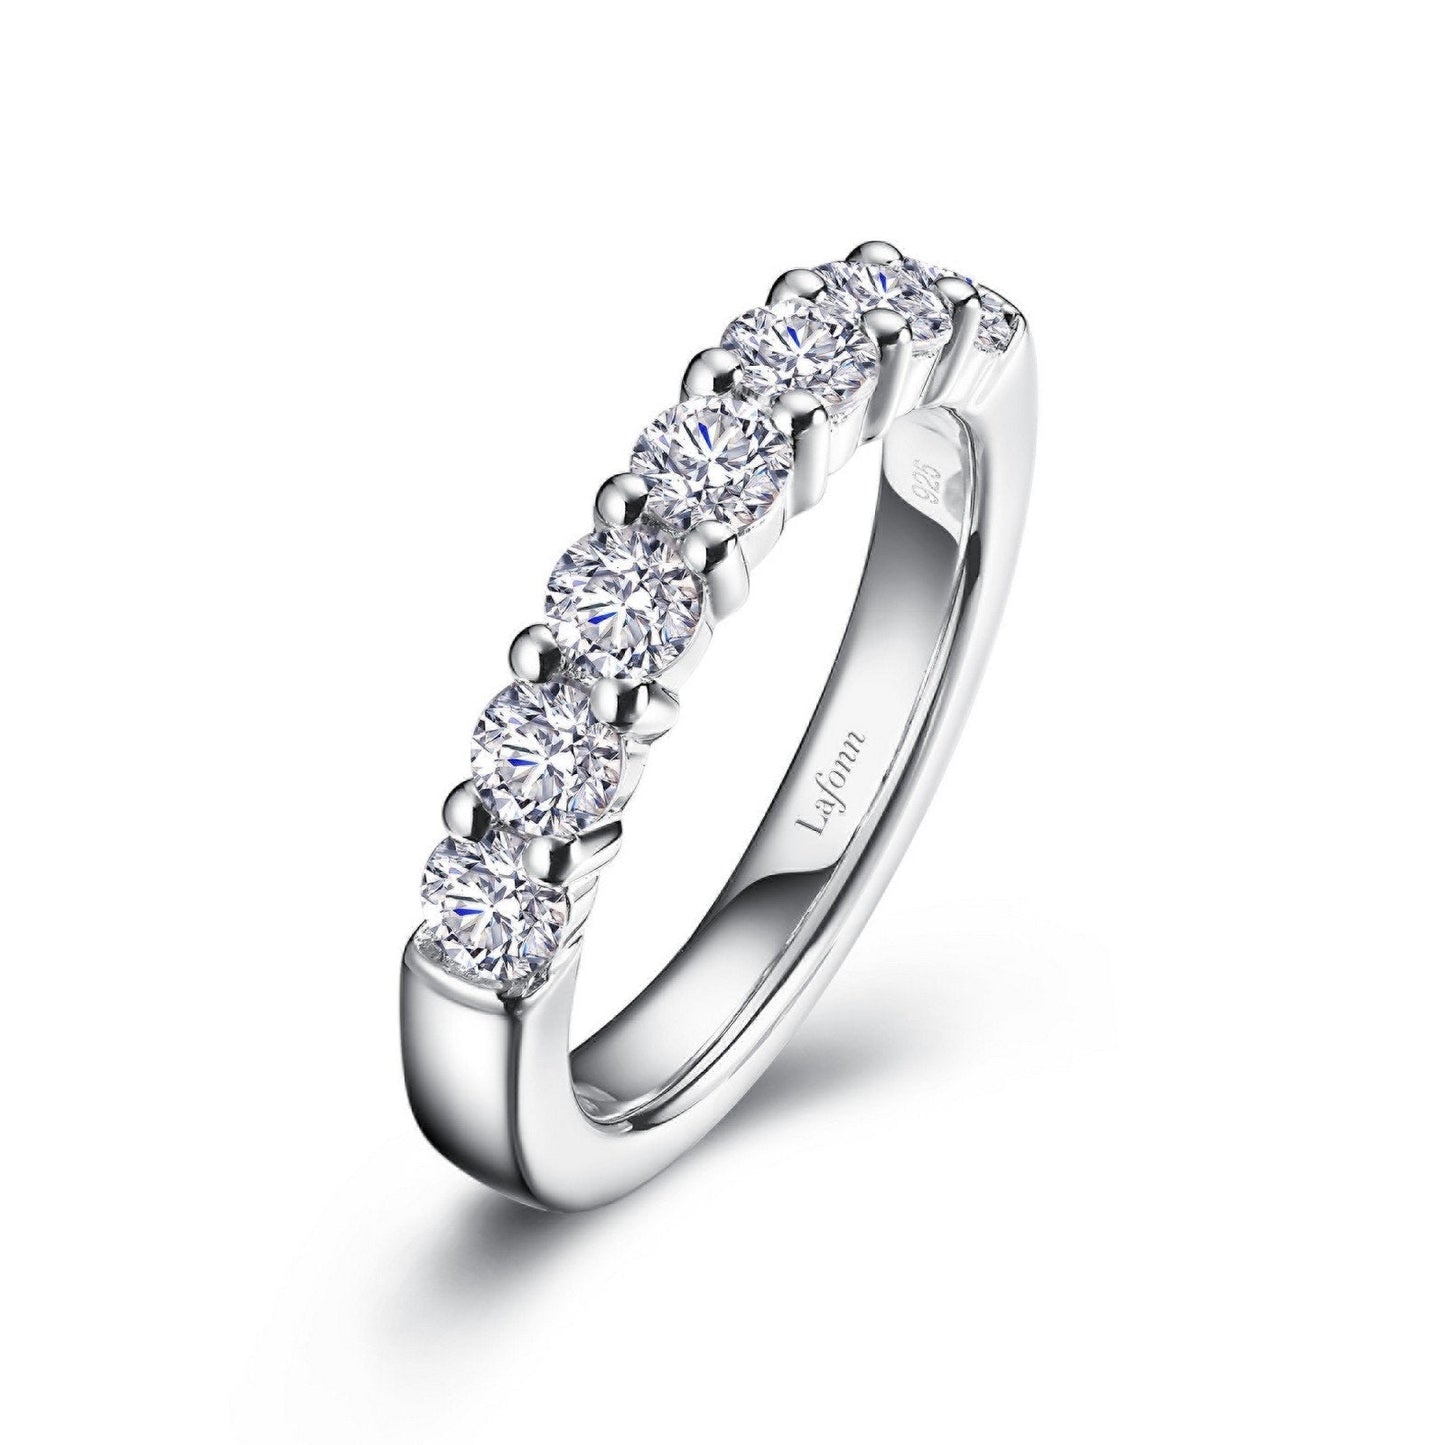 Lafonn 1.2 CTW Half-Eternity Band Simulated Diamond RINGS Size 7 Platinum 1.2 CTS Approx. 3.5mm (W)